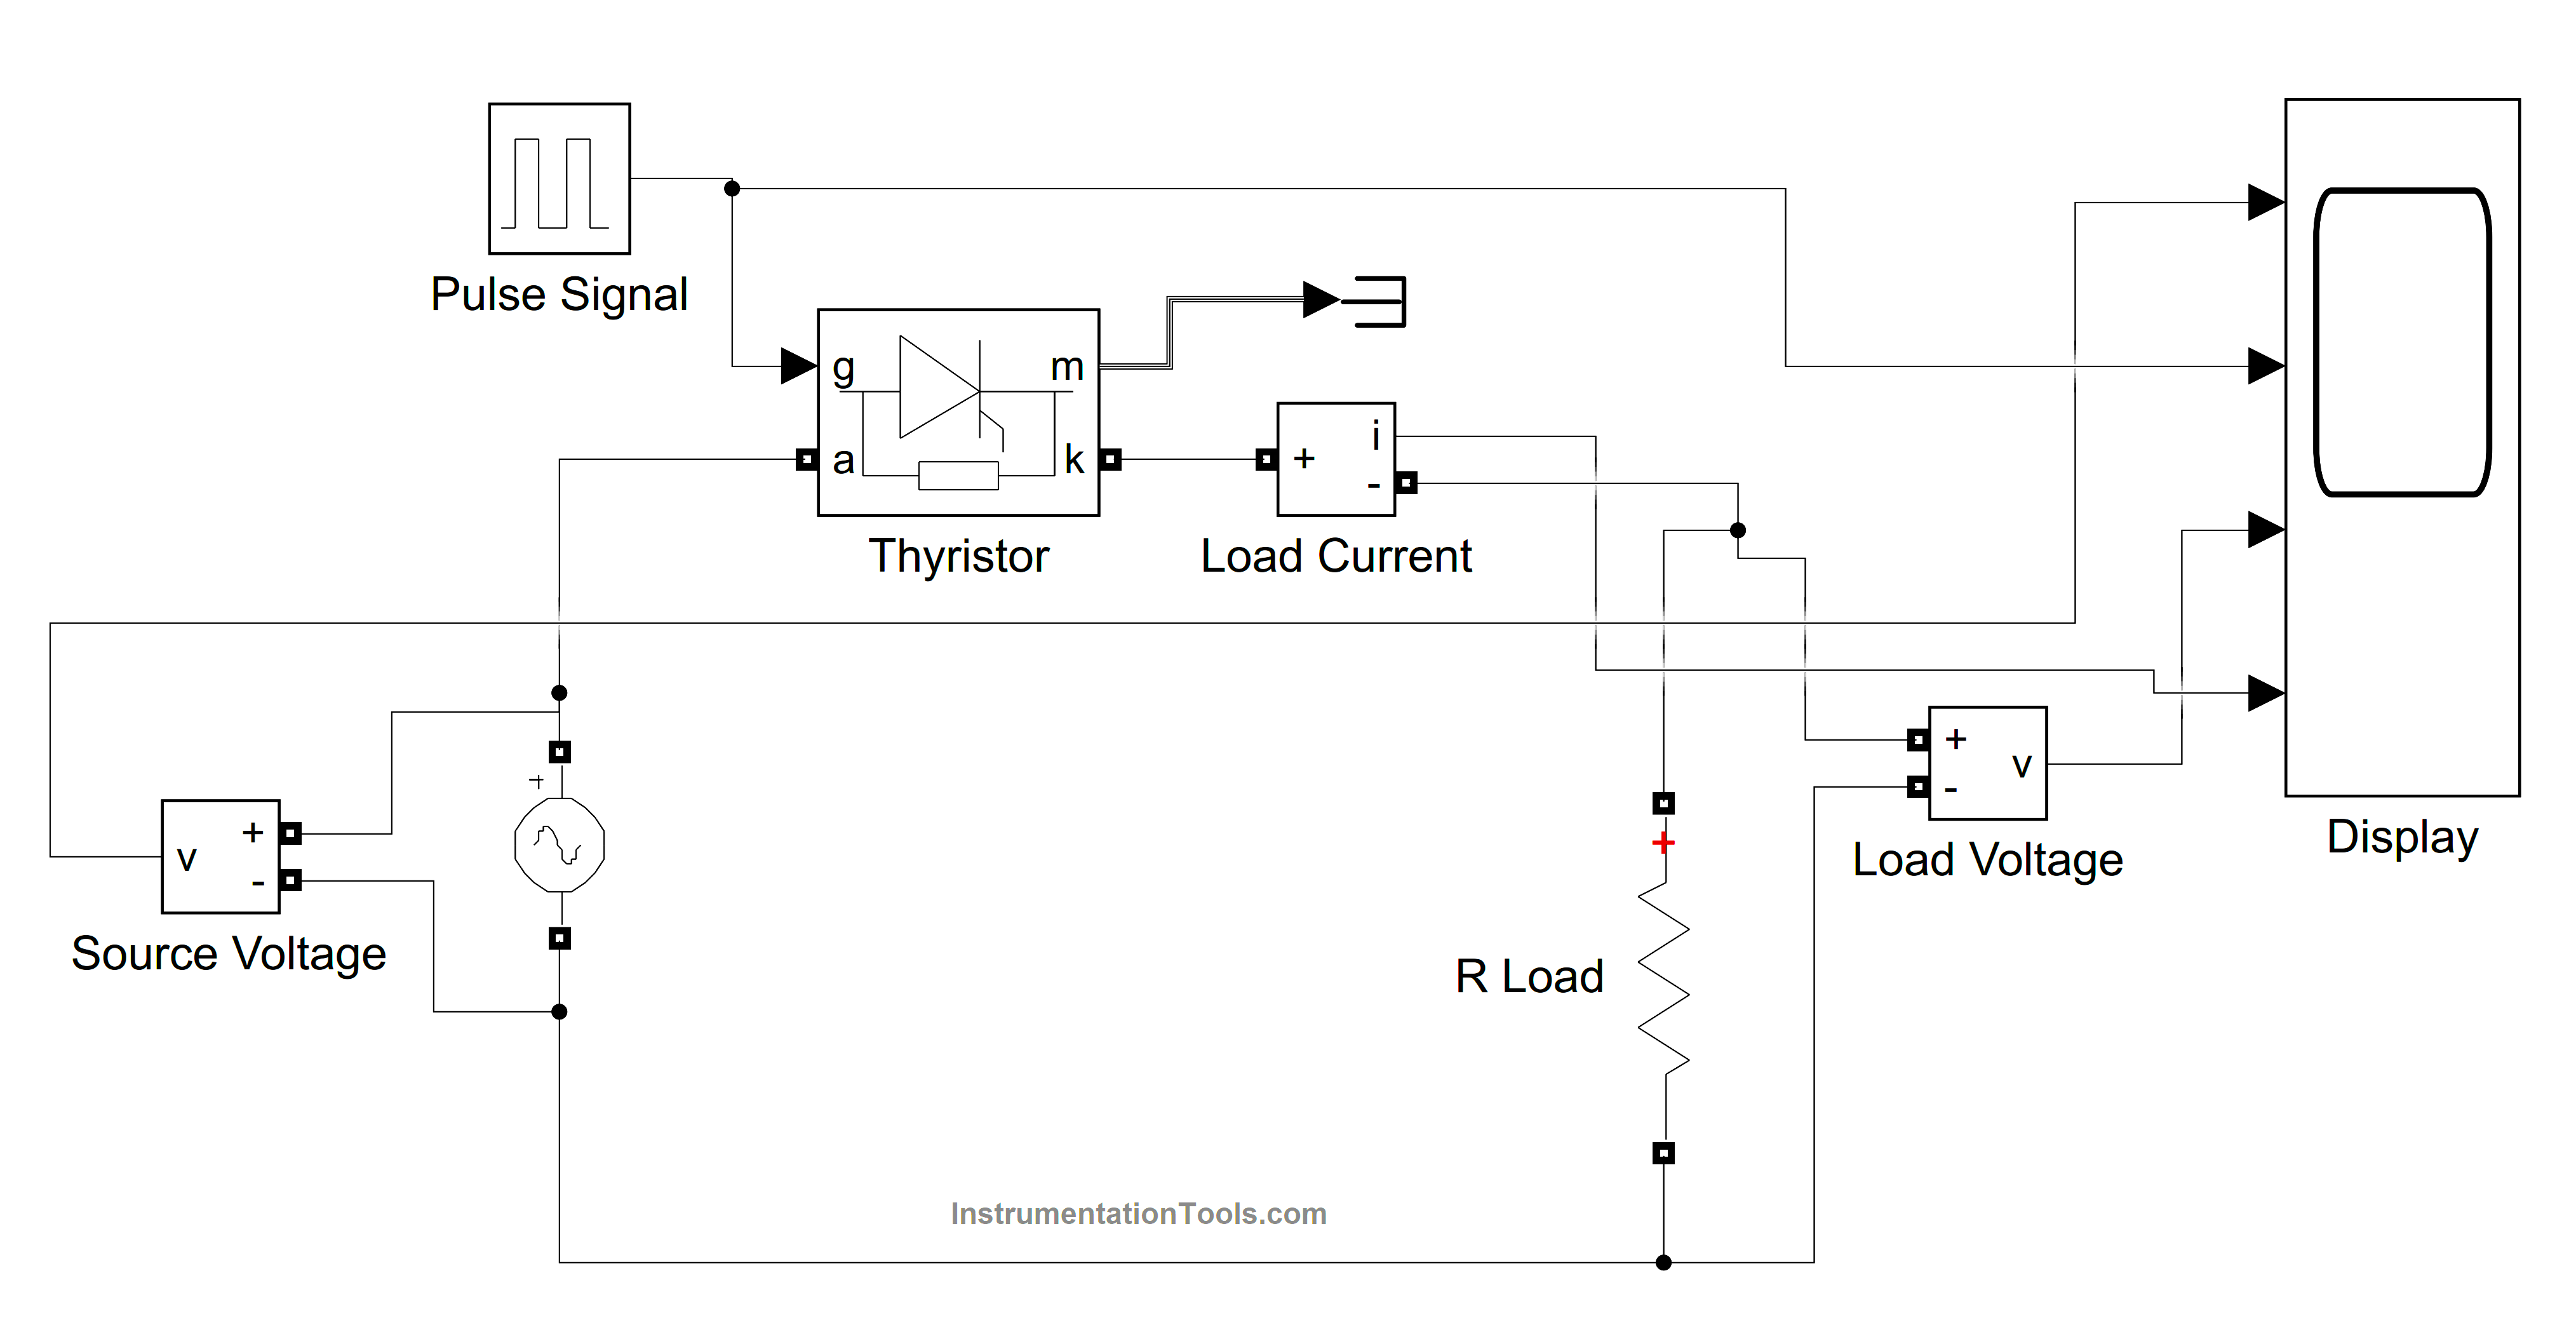 Matlab Simulink Circuit of Half-controlled Rectifier With Load